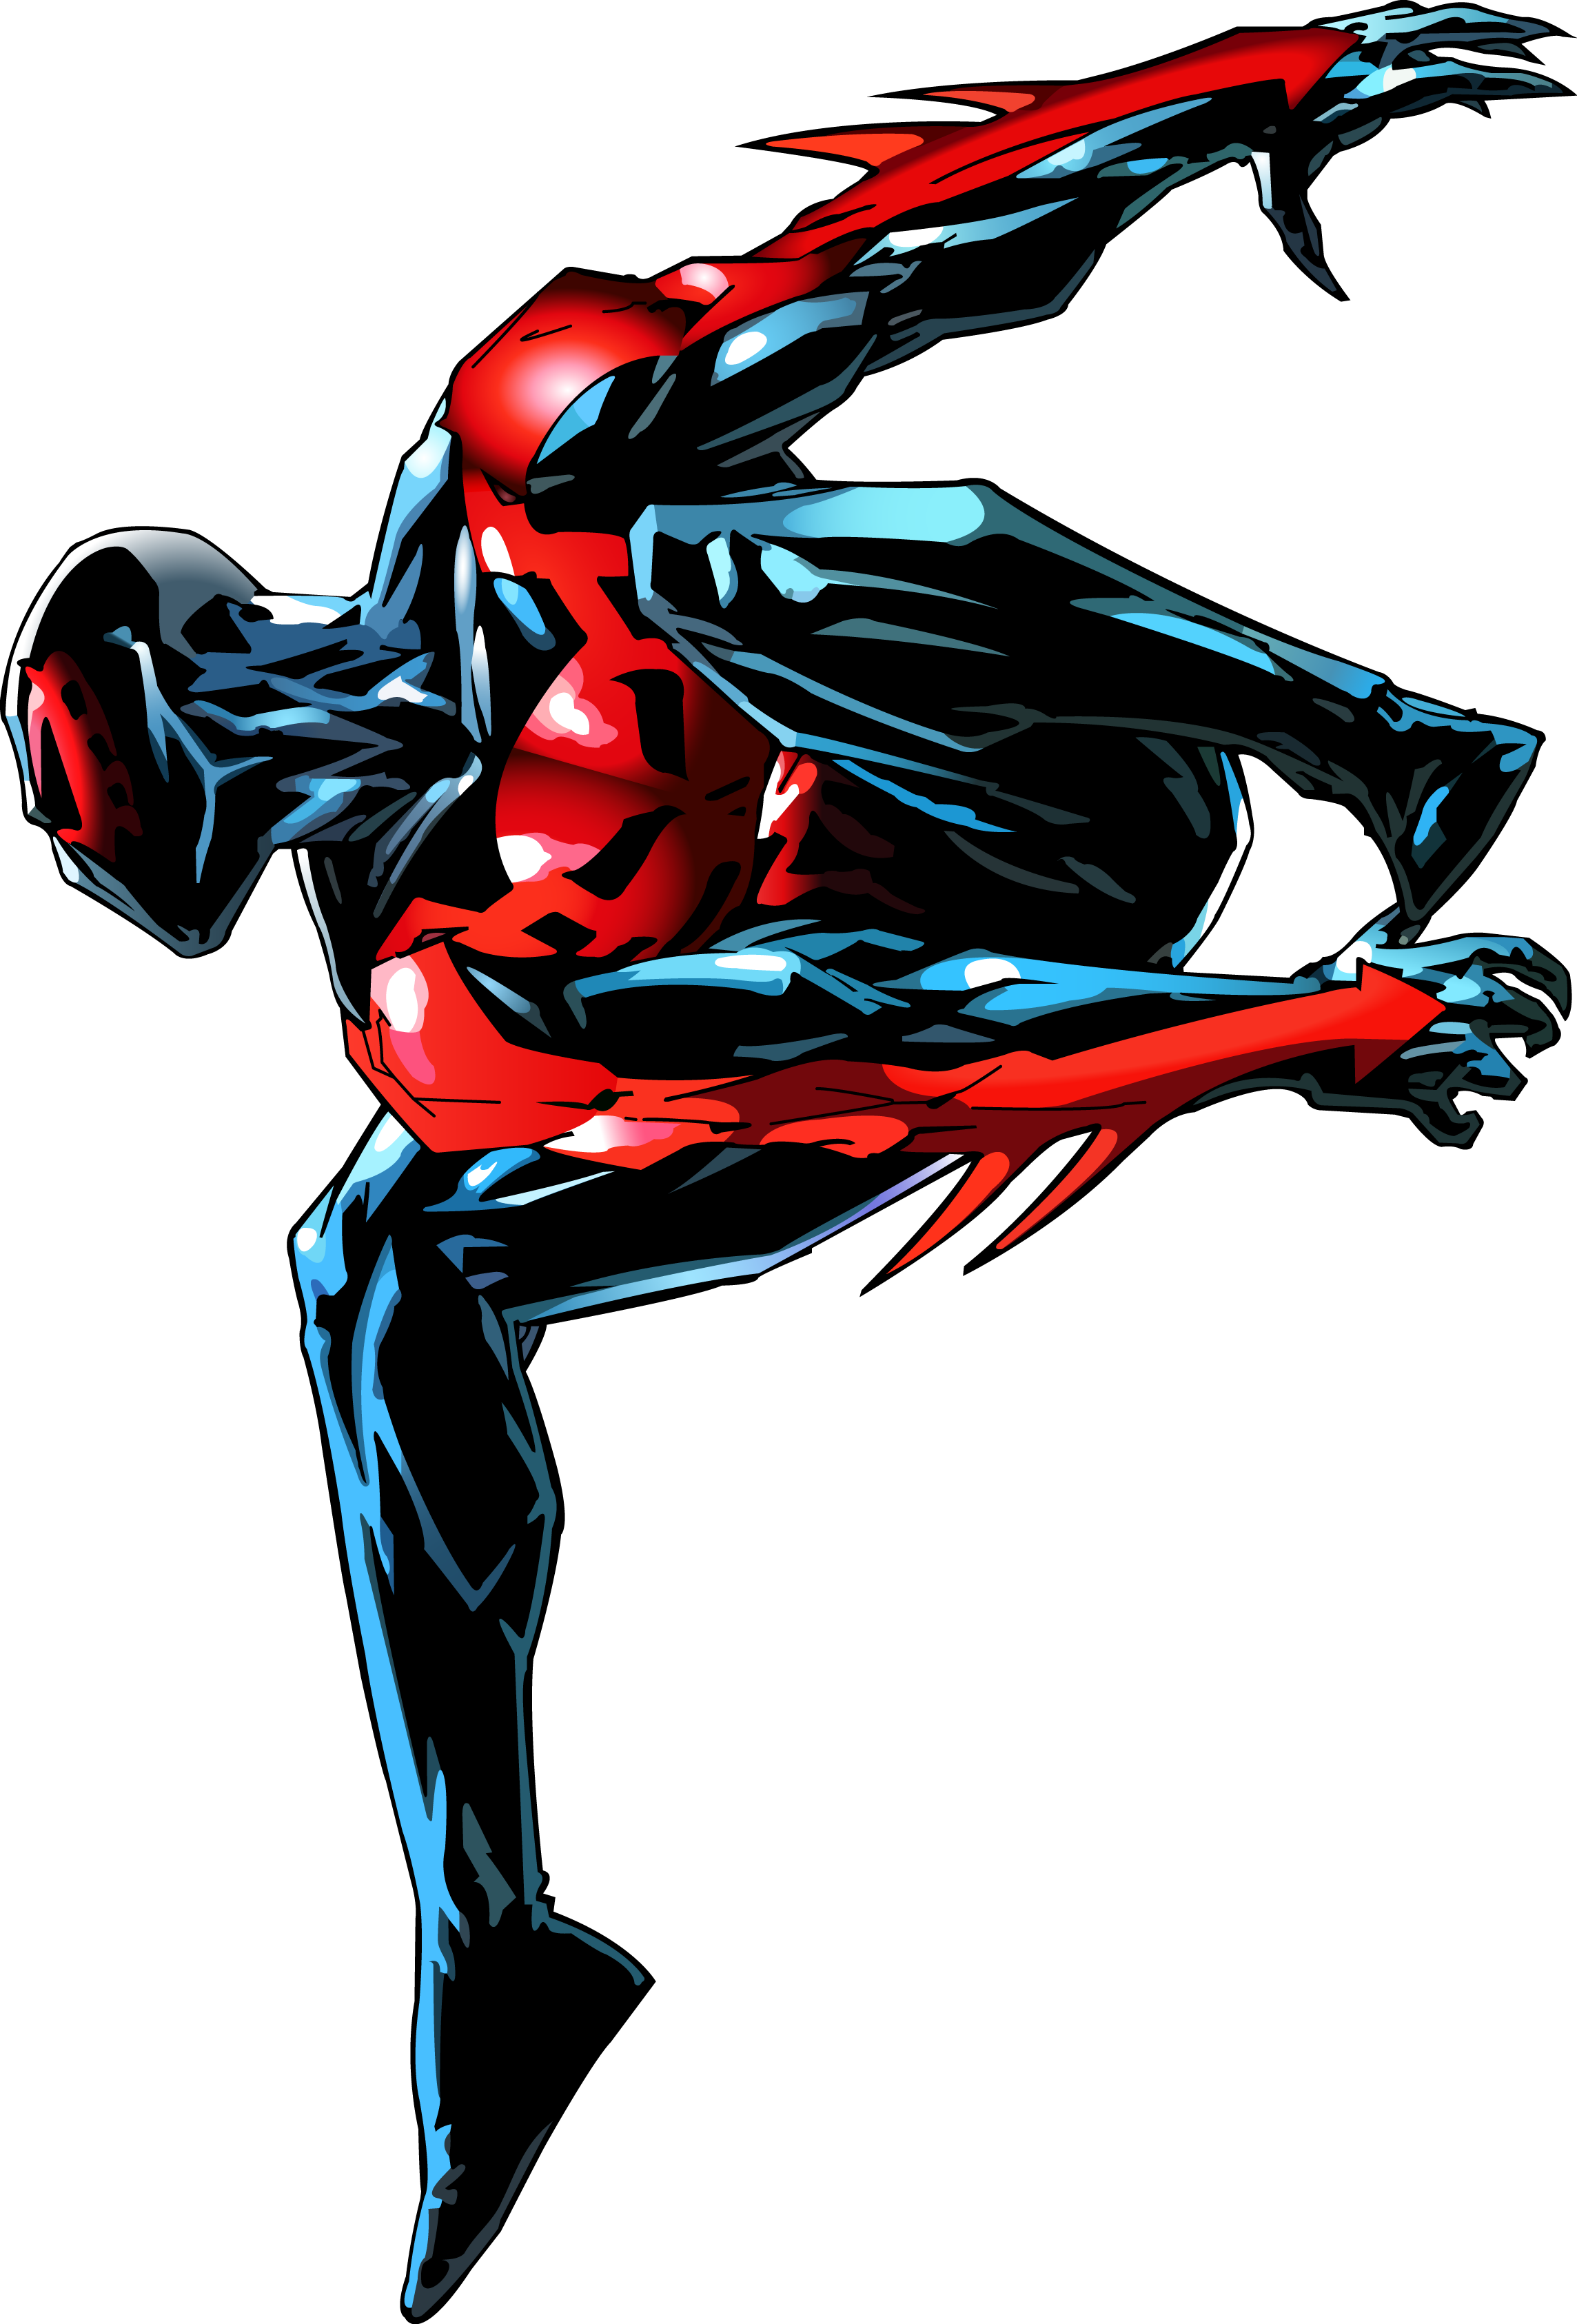 Spider Man 2099 Across the Spiderverse Wallpaper 4k Ultra HD ID9130